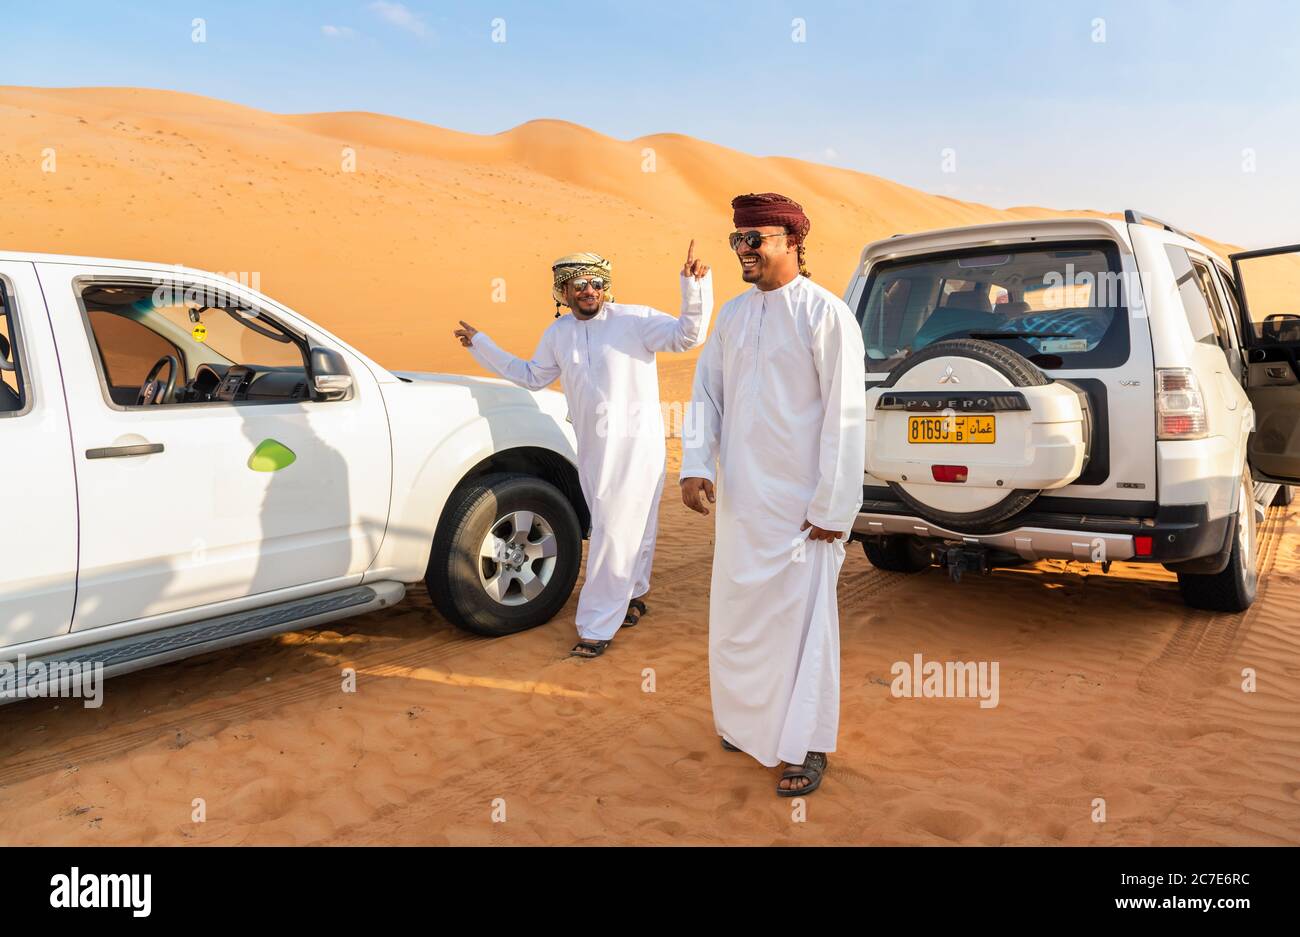 Wahiba Sands, Oman - February 12, 2020: Happy Omani men in traditional clothes have fun with white 4x4 offroad cars in Wahiba Sands Desert, Sultanate Stock Photo